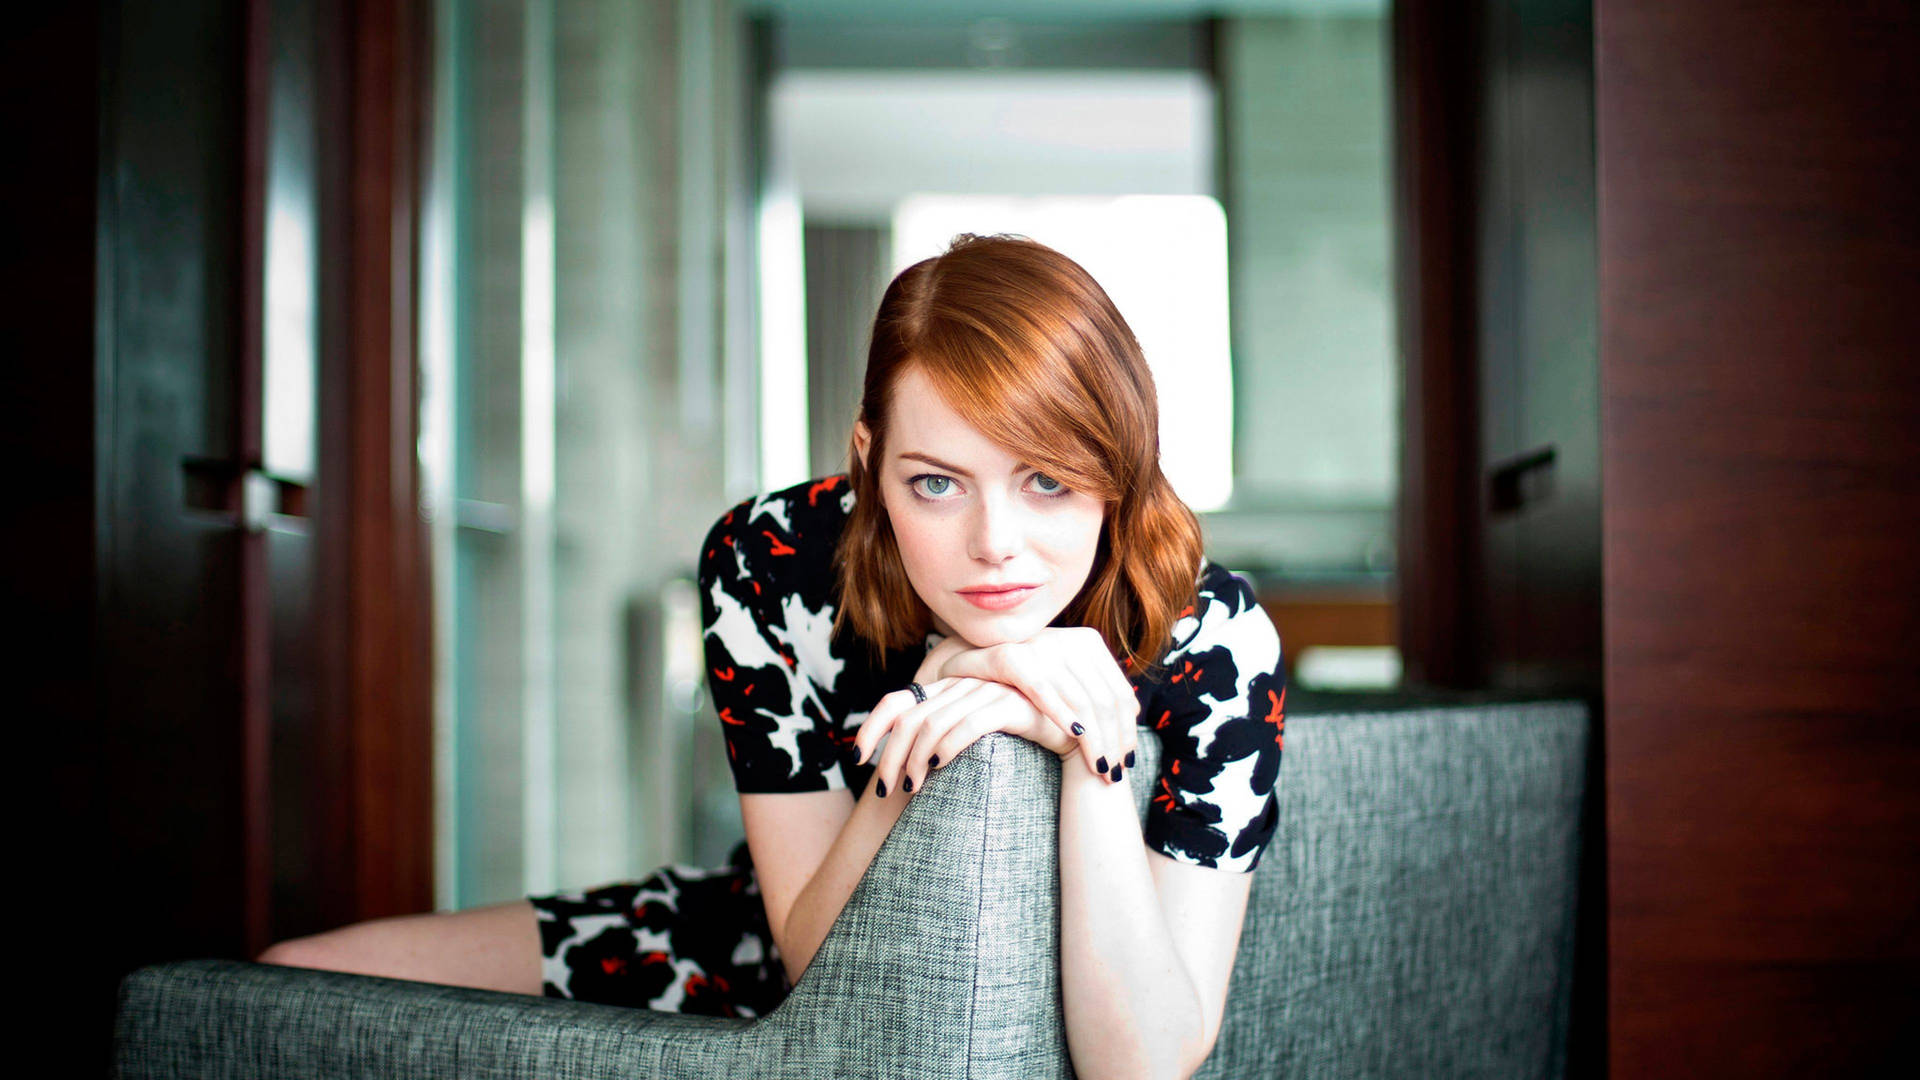 Emma Stone perched on a large couch Wallpaper